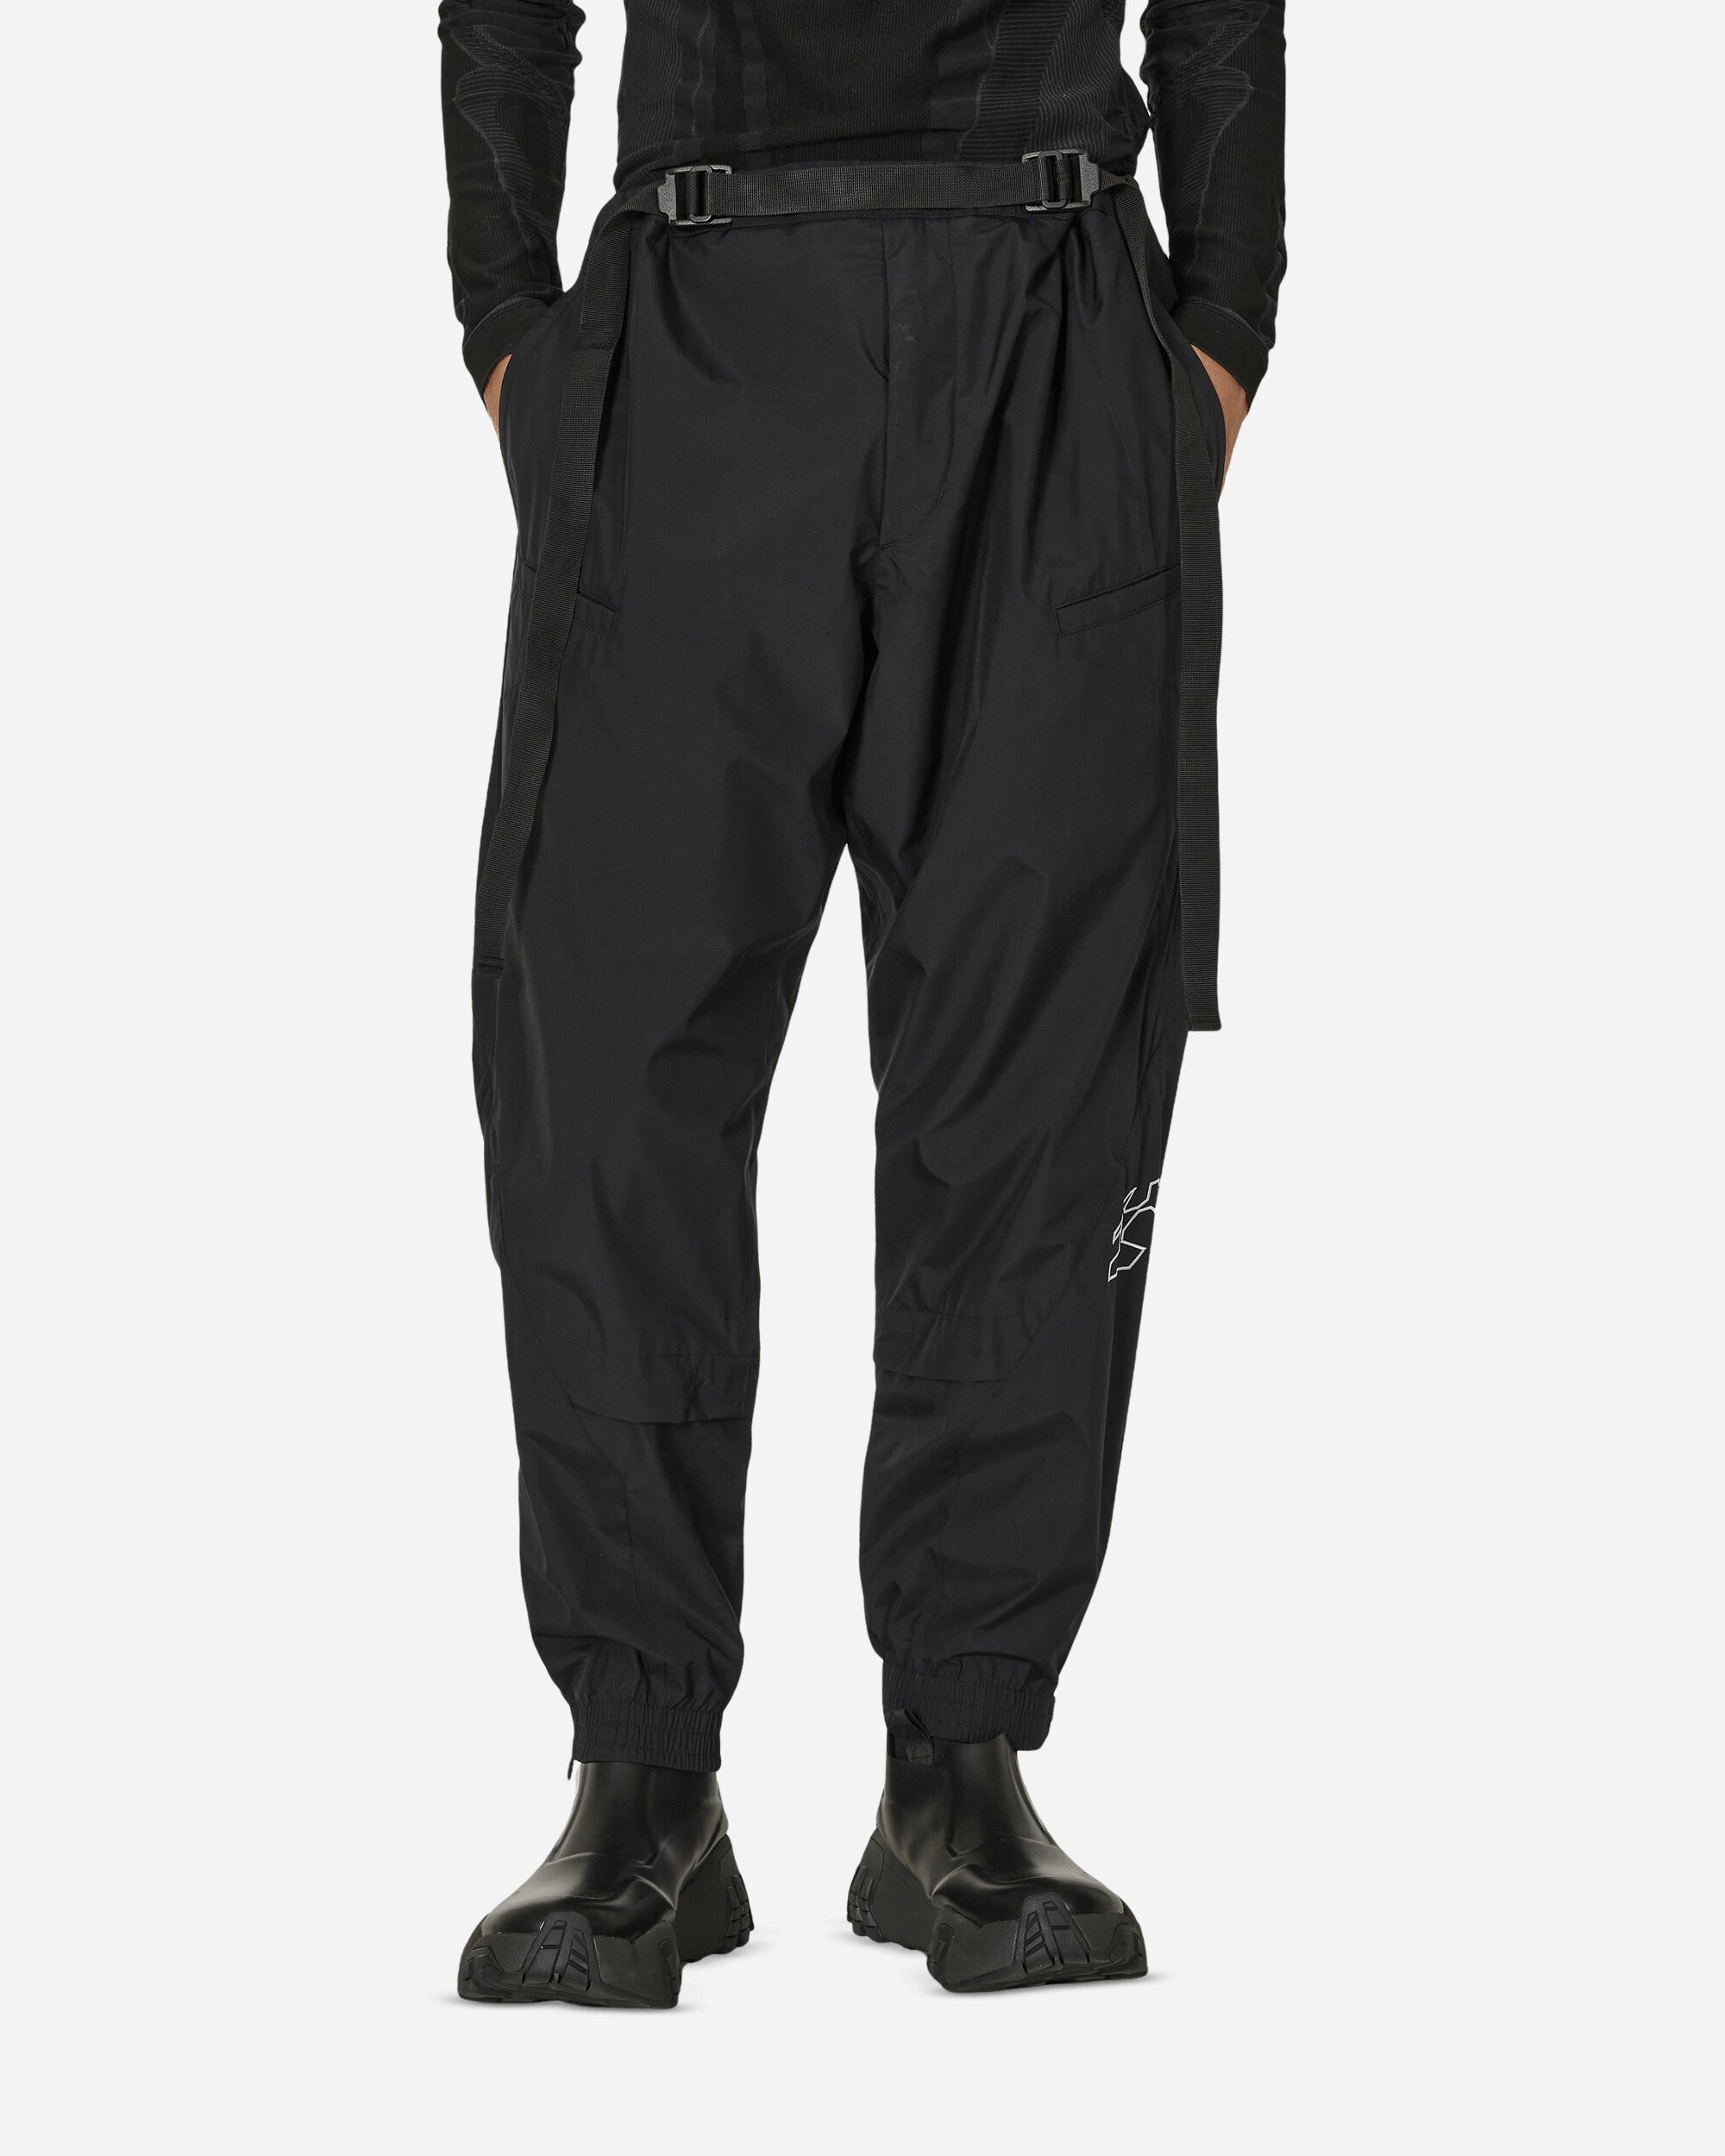 2L GORE-TEX® Windstopper® Insulated Vent Pants - 1